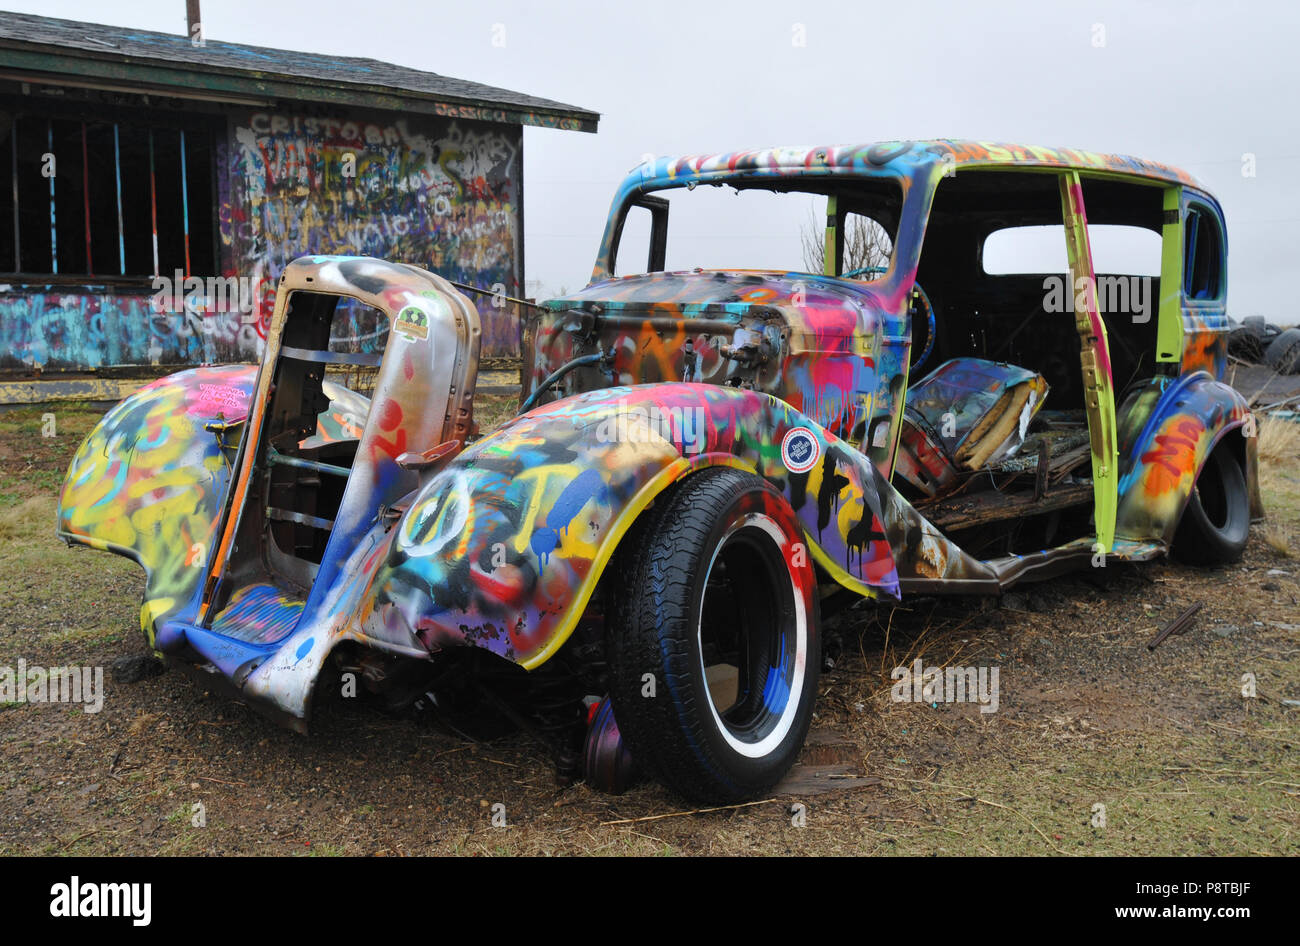 The shell of an old car sits covered in colorful spray-painted graffiti outside an abandoned trading post in the Route 66 town of Conway, Texas. Stock Photo